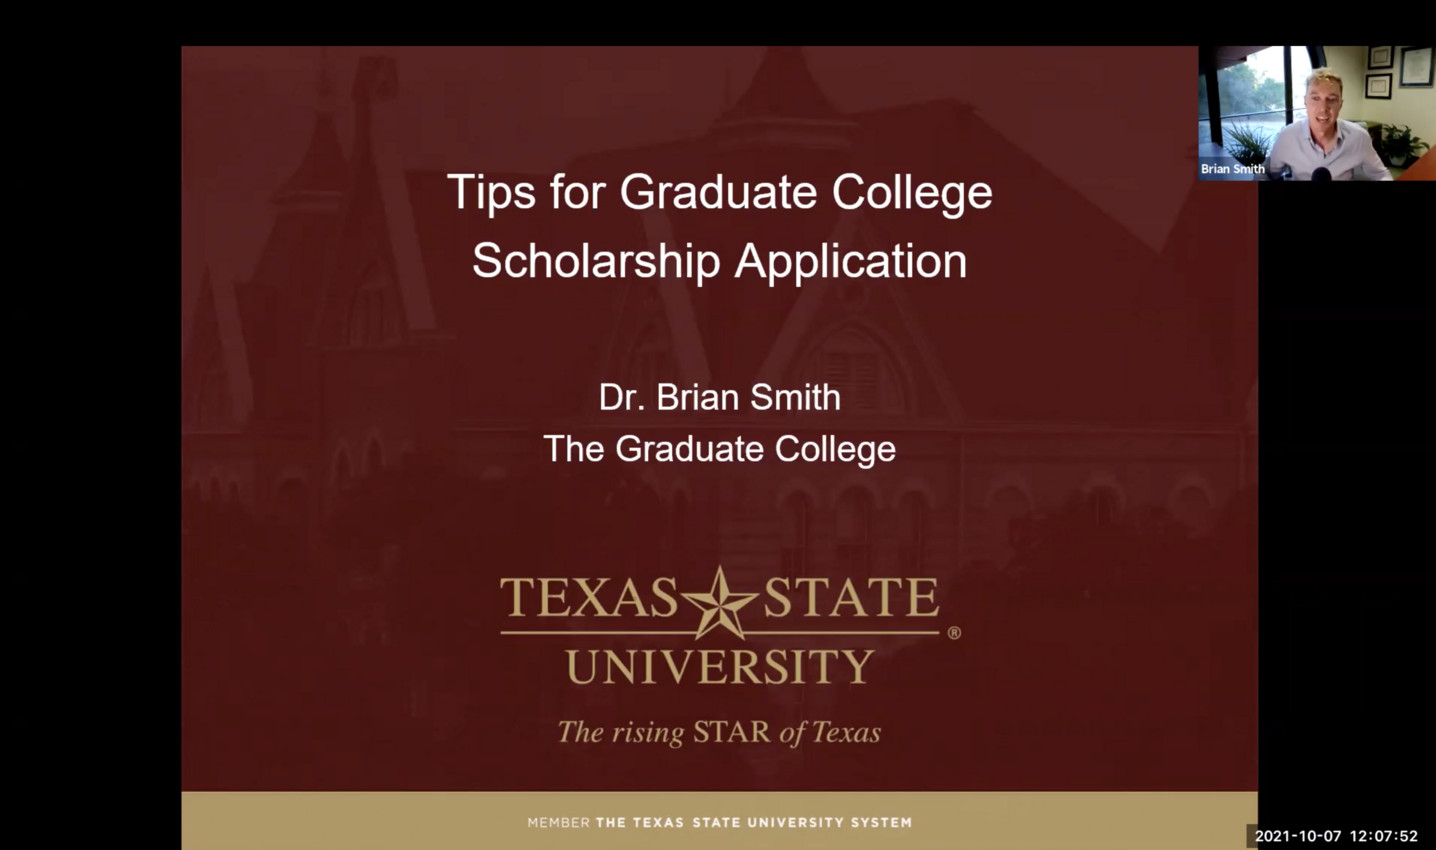 a still image from the video with text that reads "tips for graduate college scholarship application, dr. brian smith, the graduate college"